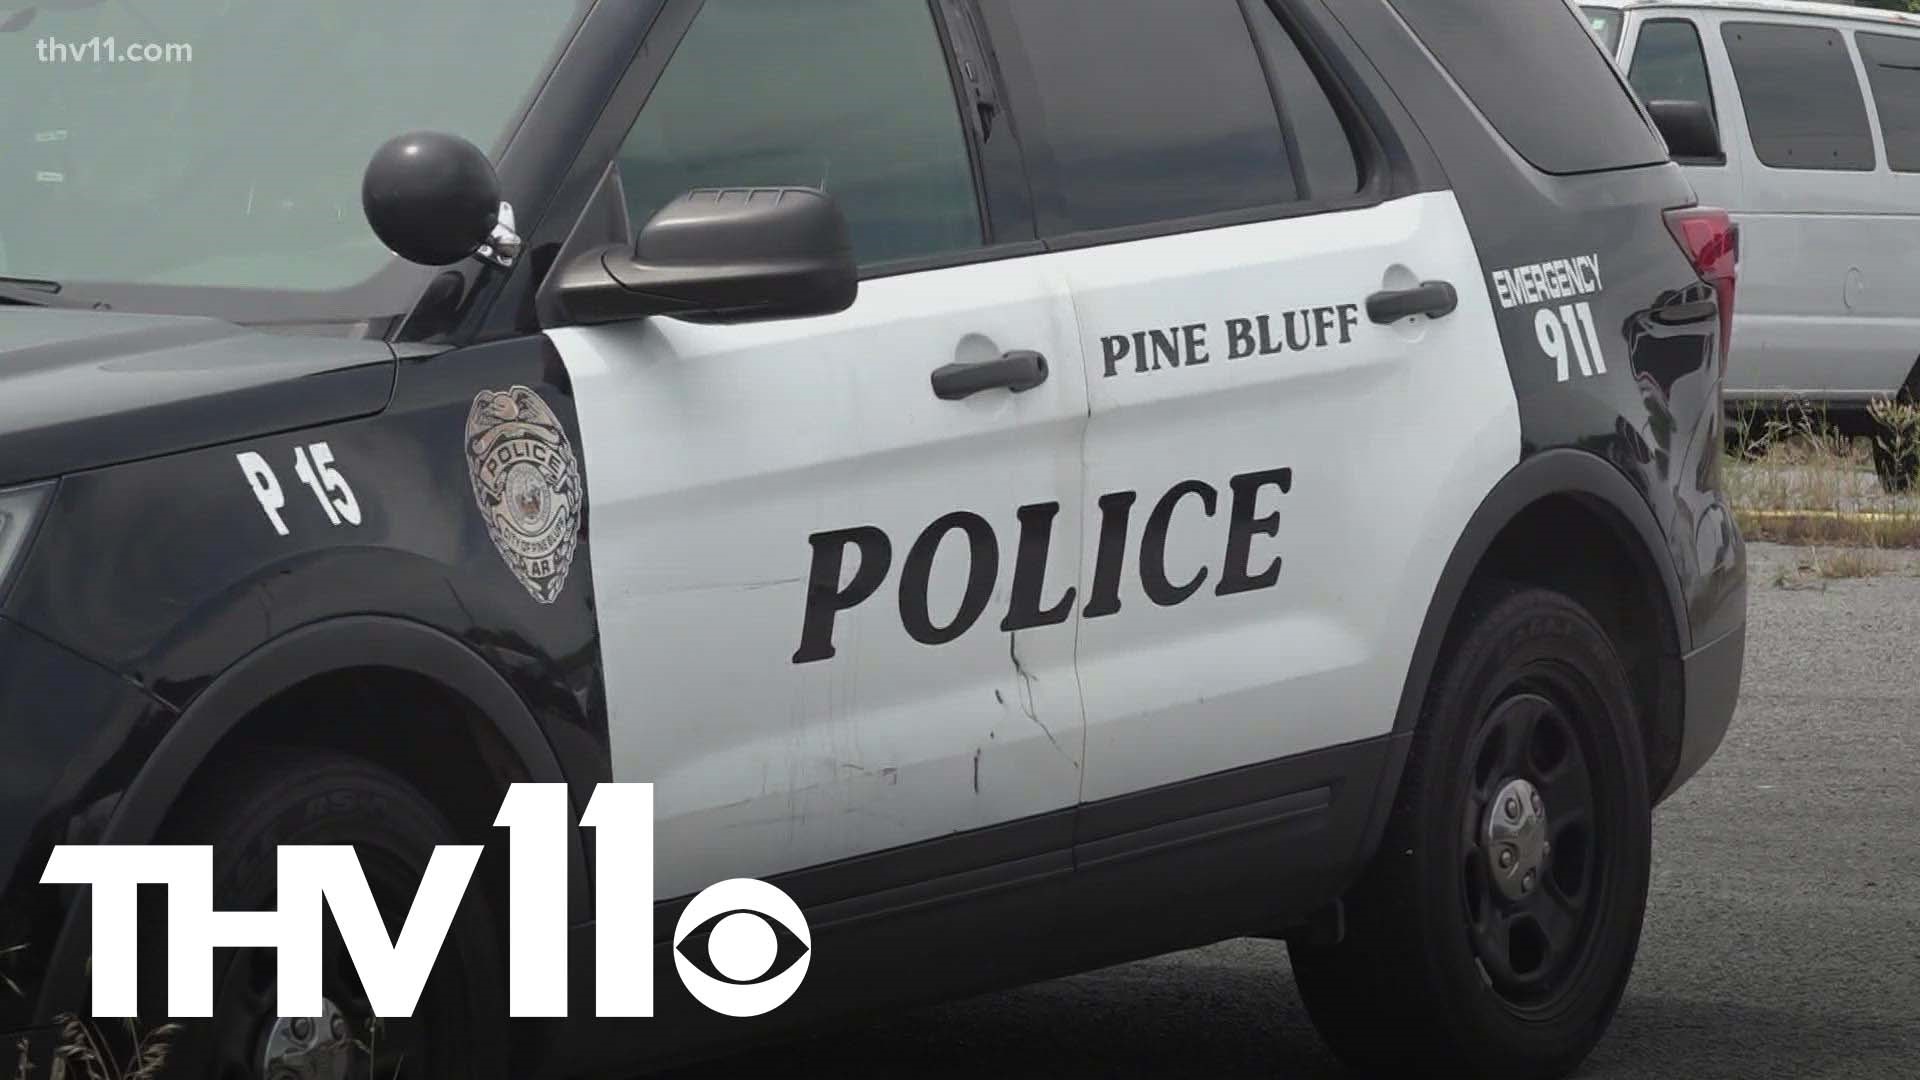 The Pine Bluff Police Department is searching for a fourth suspect in a shooting incident that left one person dead and several others injured over the weekend.